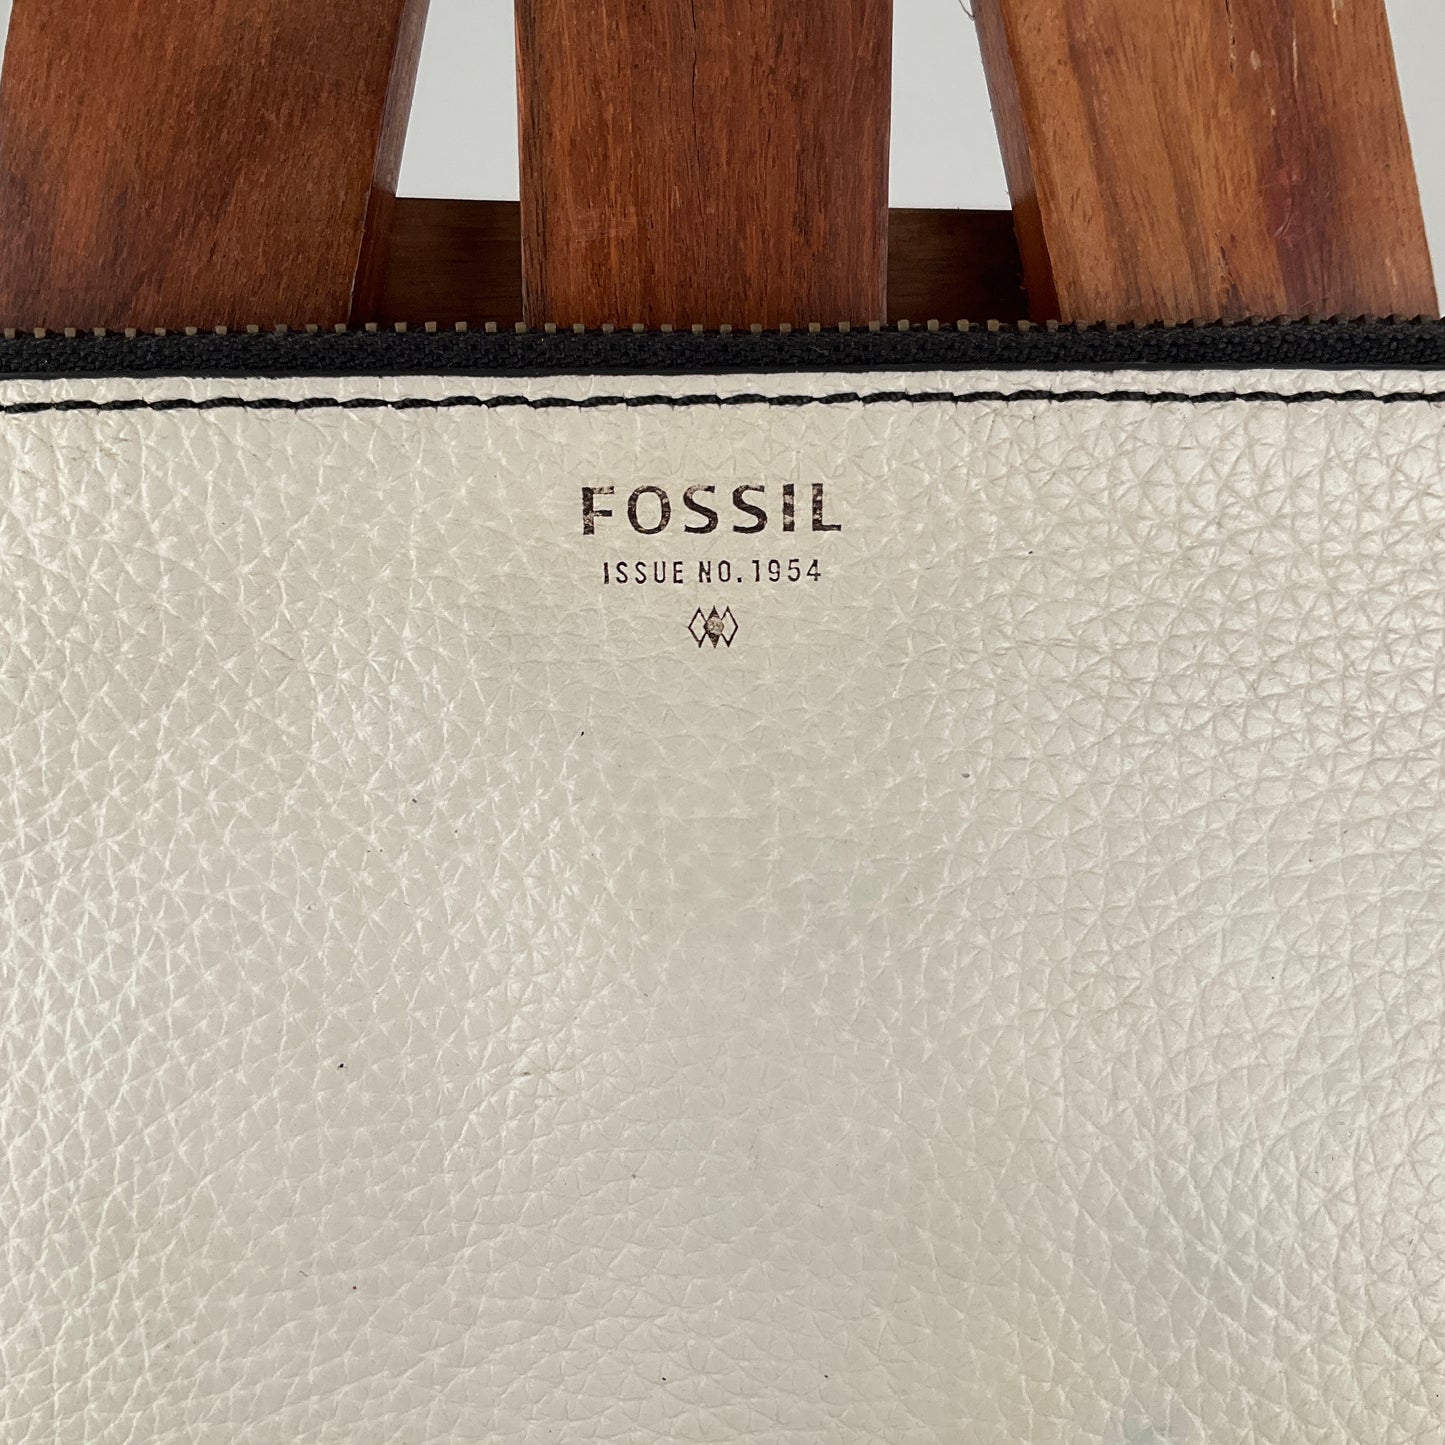 Fossil - Holdall Wallet/Purse